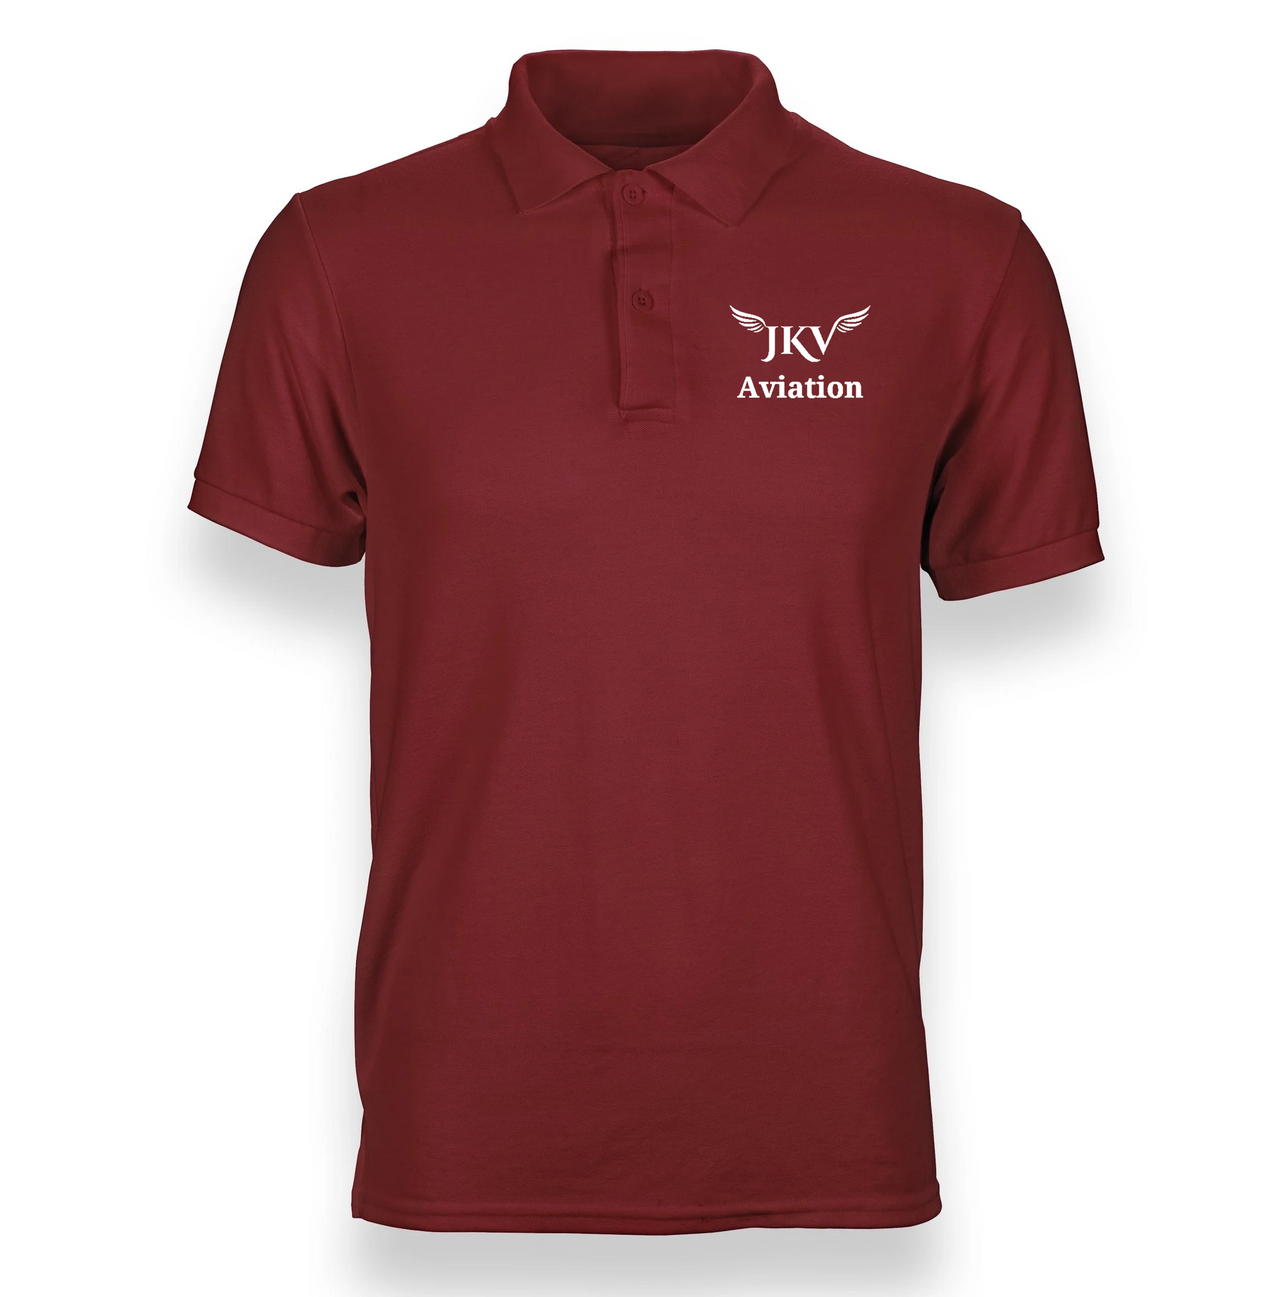 AVATION AIRLINES POLO T-SHIRT